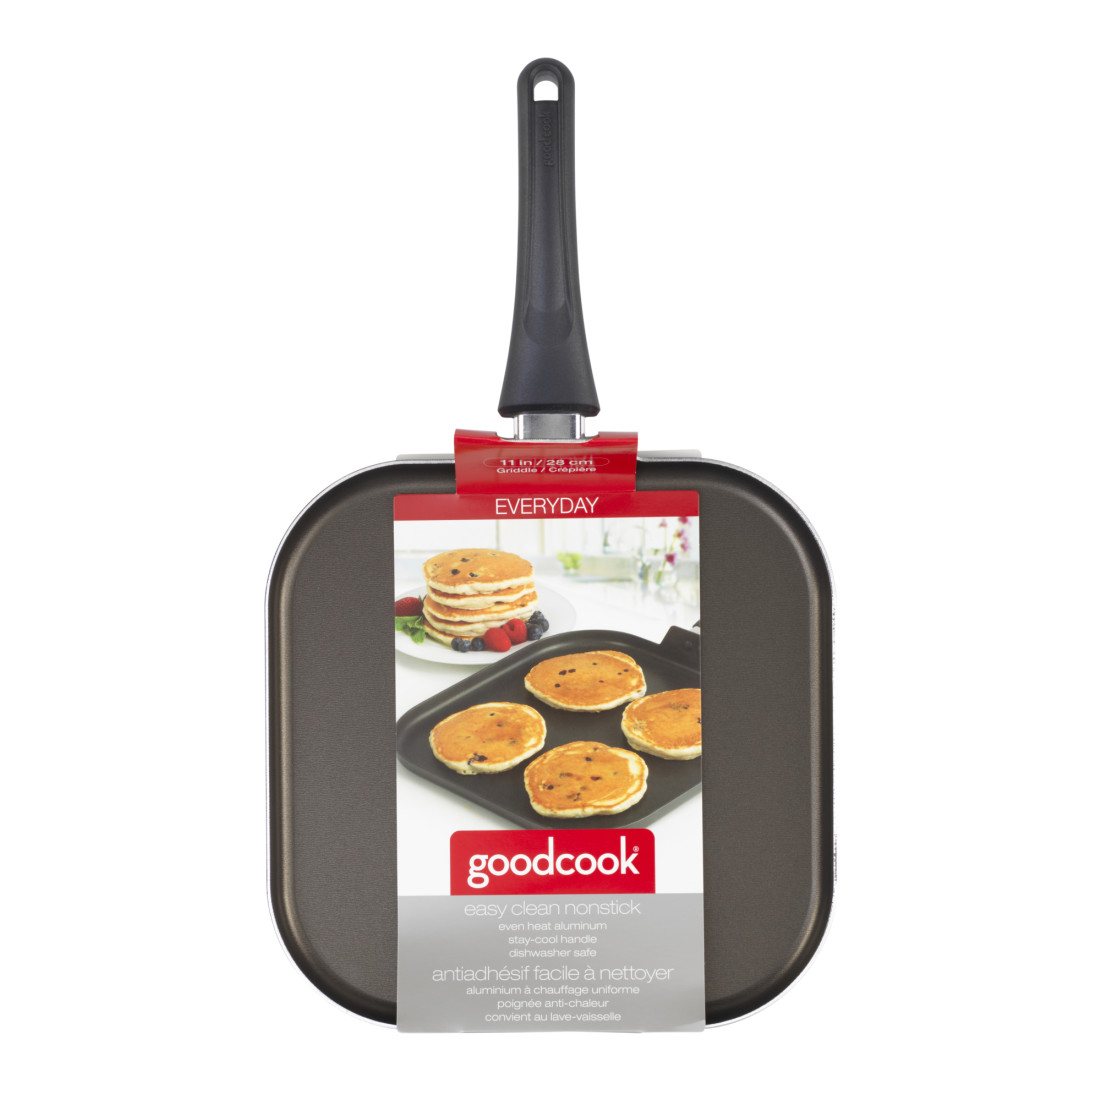 Grey Speckled Non-Stick Griddle Pan, 11 | at Home